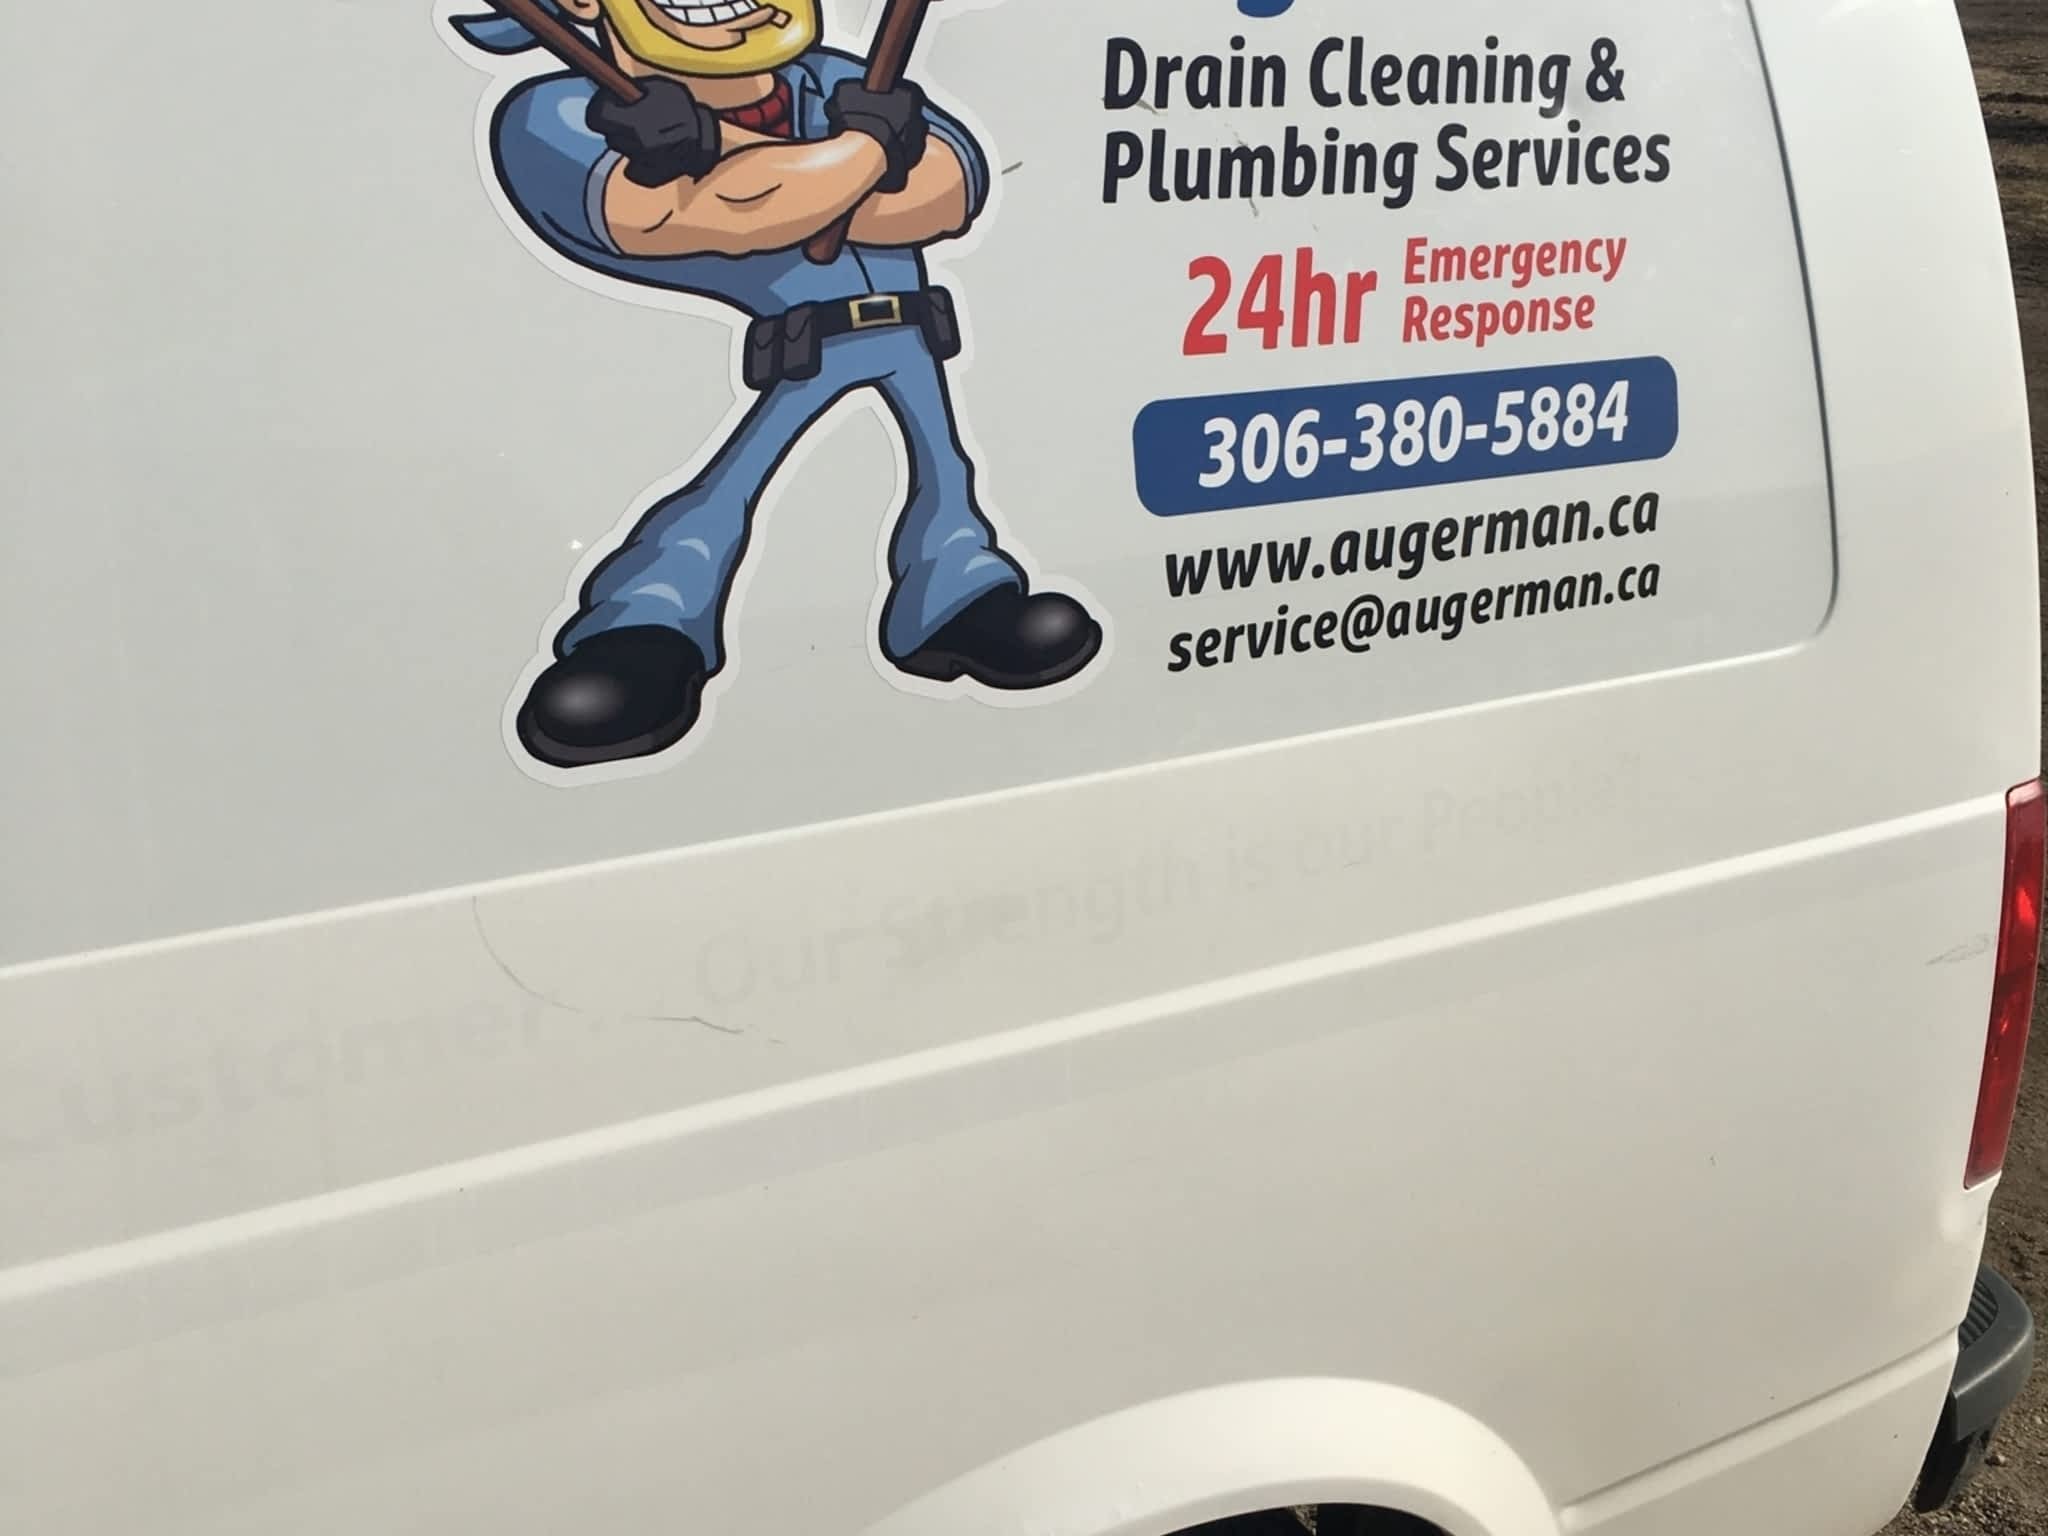 photo Augerman Drain Cleaning and Plumbing Services